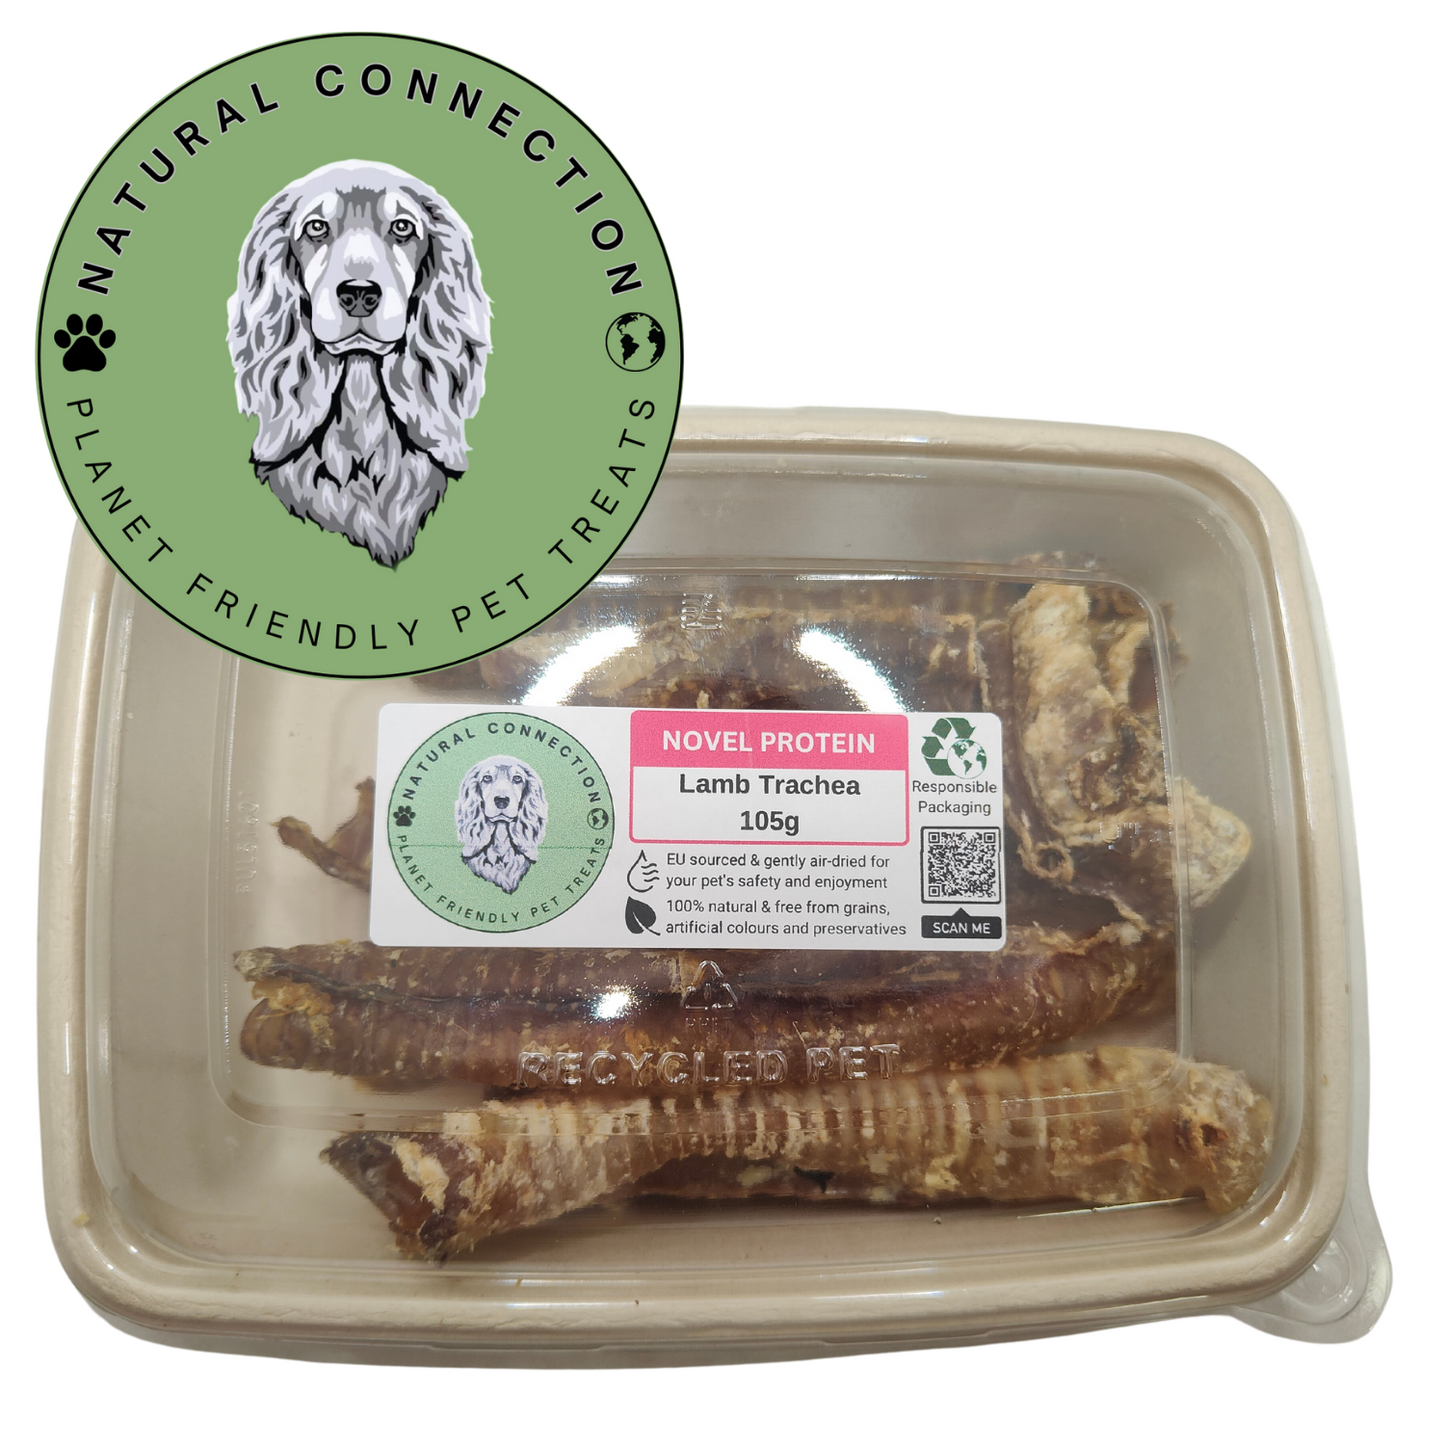 Lamb Trachea | Novel Protein Dog Chew by Natural Connection